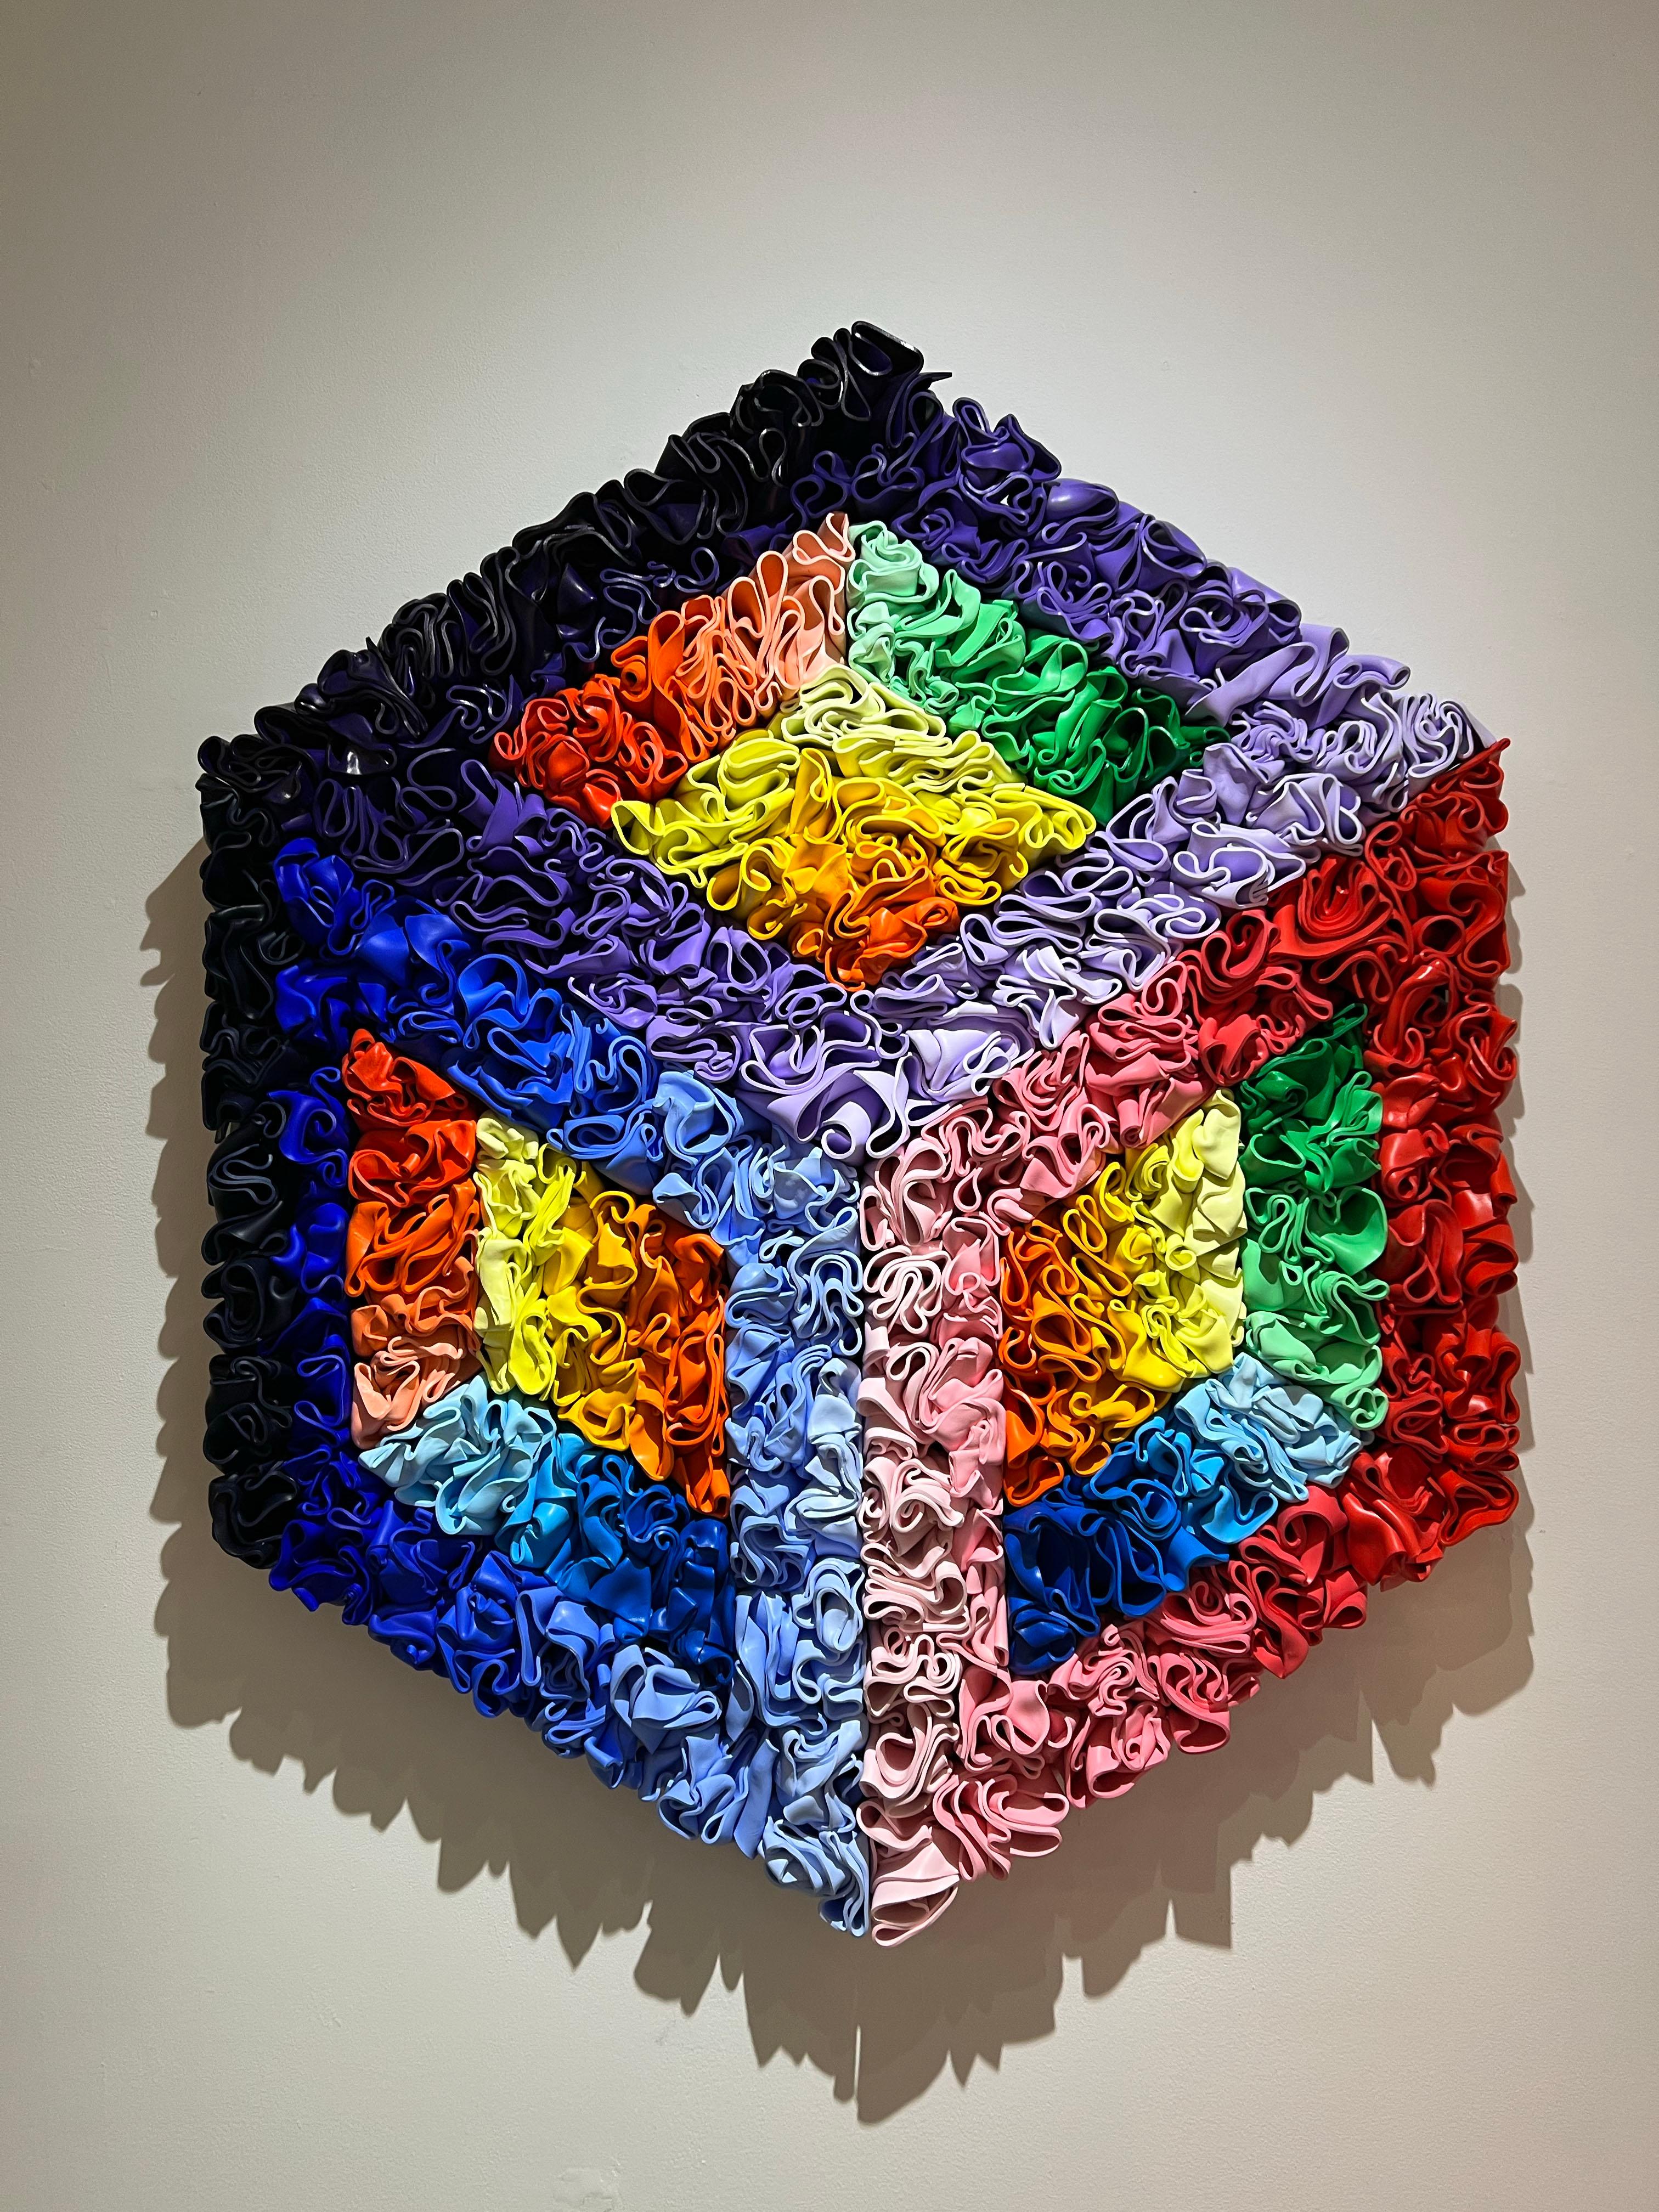 An abstract sculpture hand molded with styrene, of which creates a cubist illusion. This piece is very has very vibrant colors ranging between gradients of blues, purples, red to pink, and orange to yellow.

Rick Lazes is a three dimensional artist